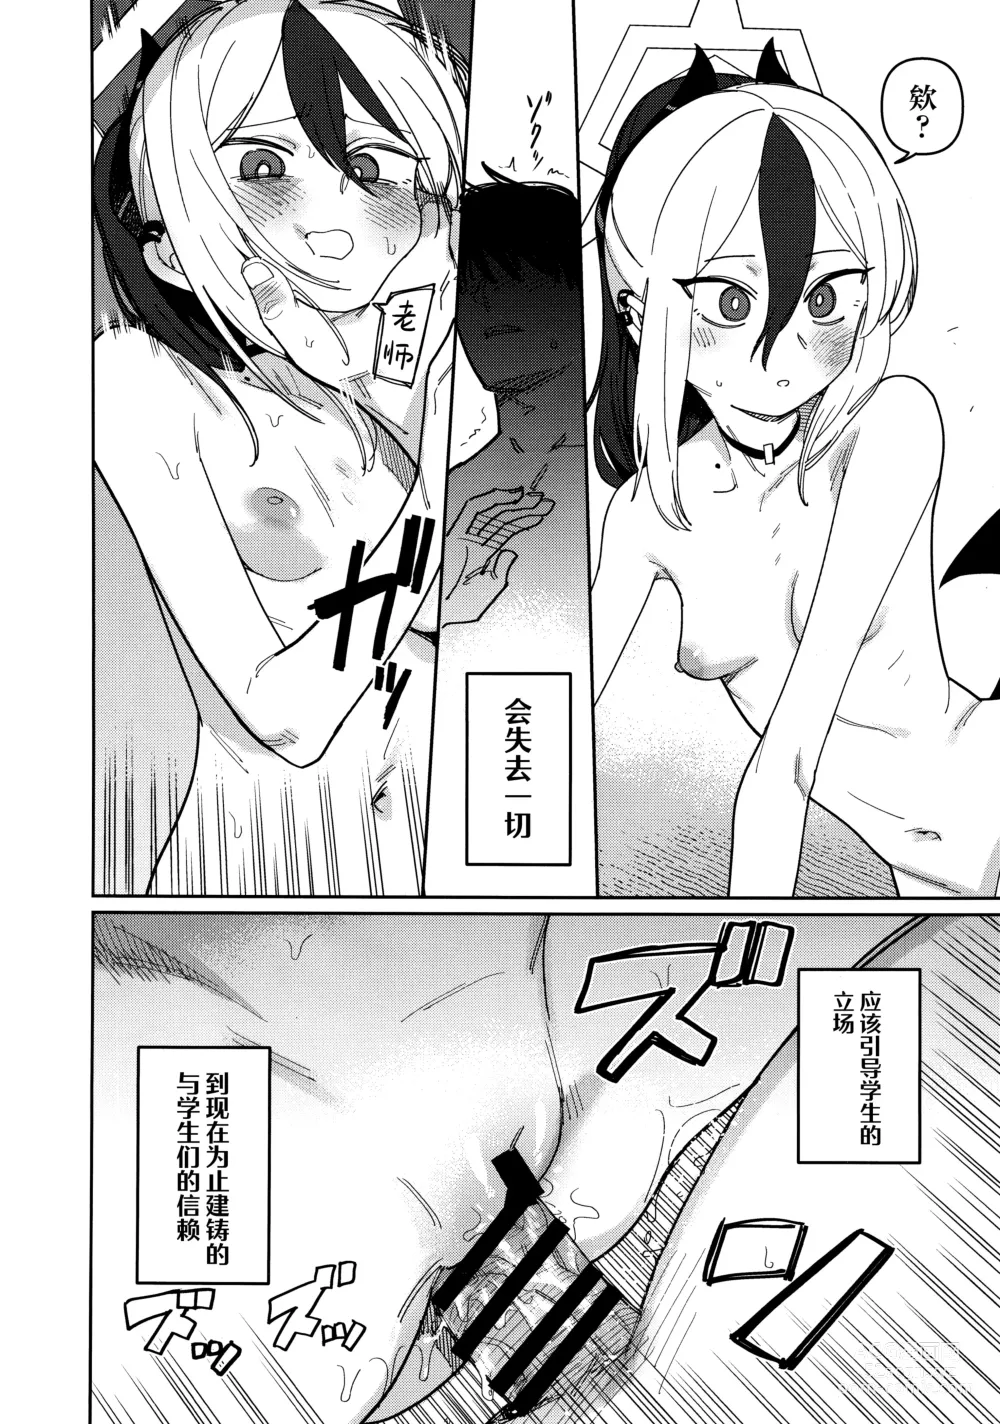 Page 16 of doujinshi 鬼方佳代子不会做这种事情 Part.2